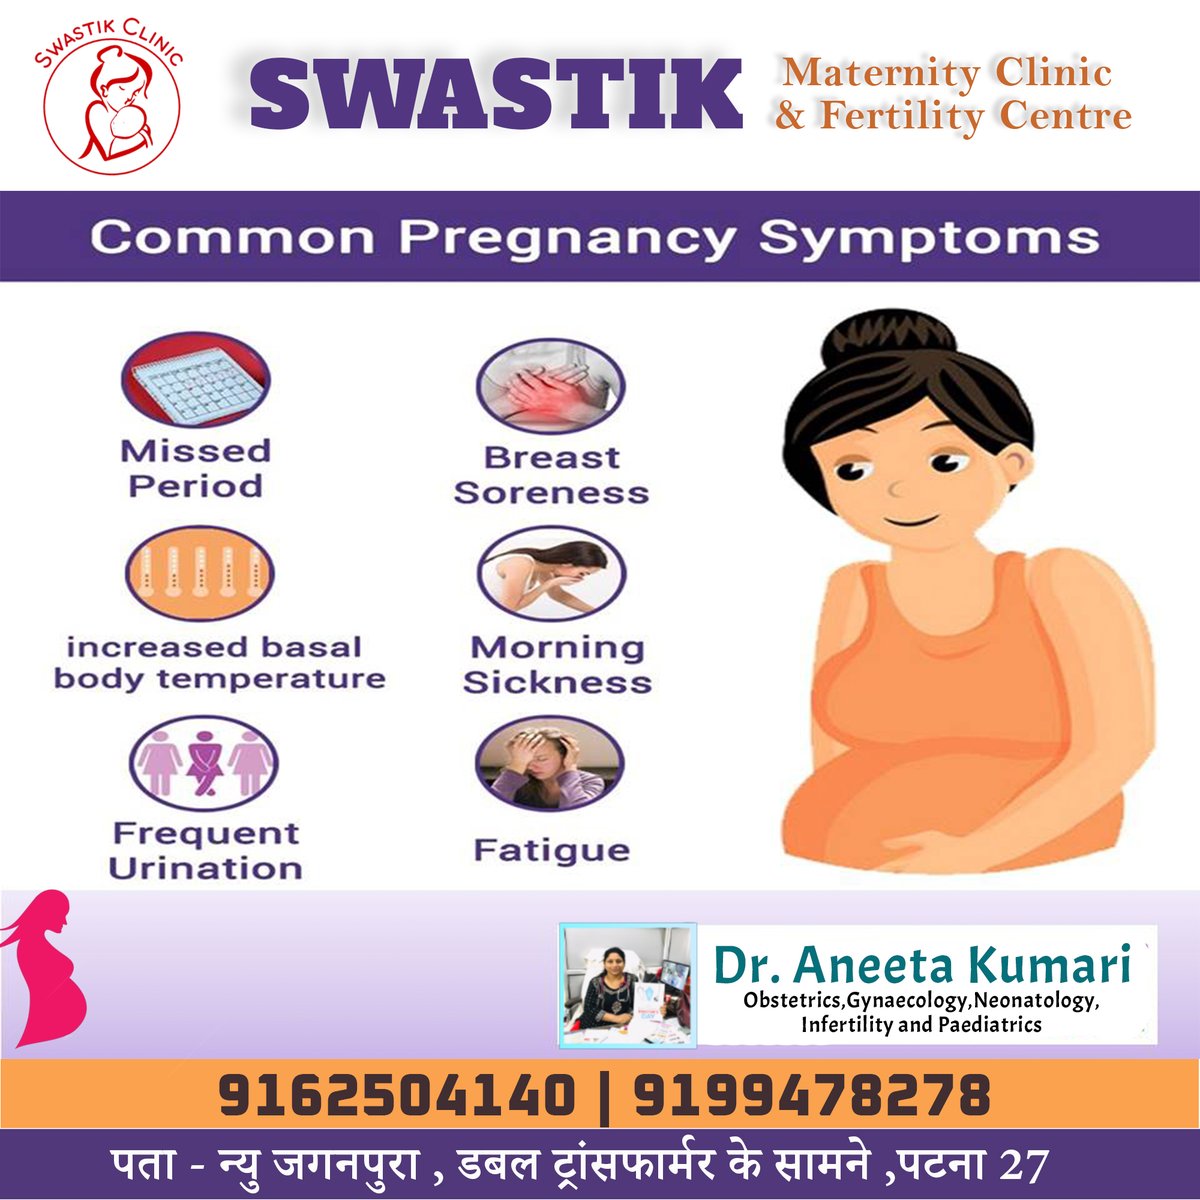 swastikmaternityclinic.com
SWASTIK MATERNITY

Pregnancy is a remarkable journey, filled with joy, anticipation, and a myriad of changes both physically and emotionally

#women #womenhealth #wellbeing #womenbody #pregnantlife #pregnancytips #pregnancyhealth #womensbody #baby #newborn